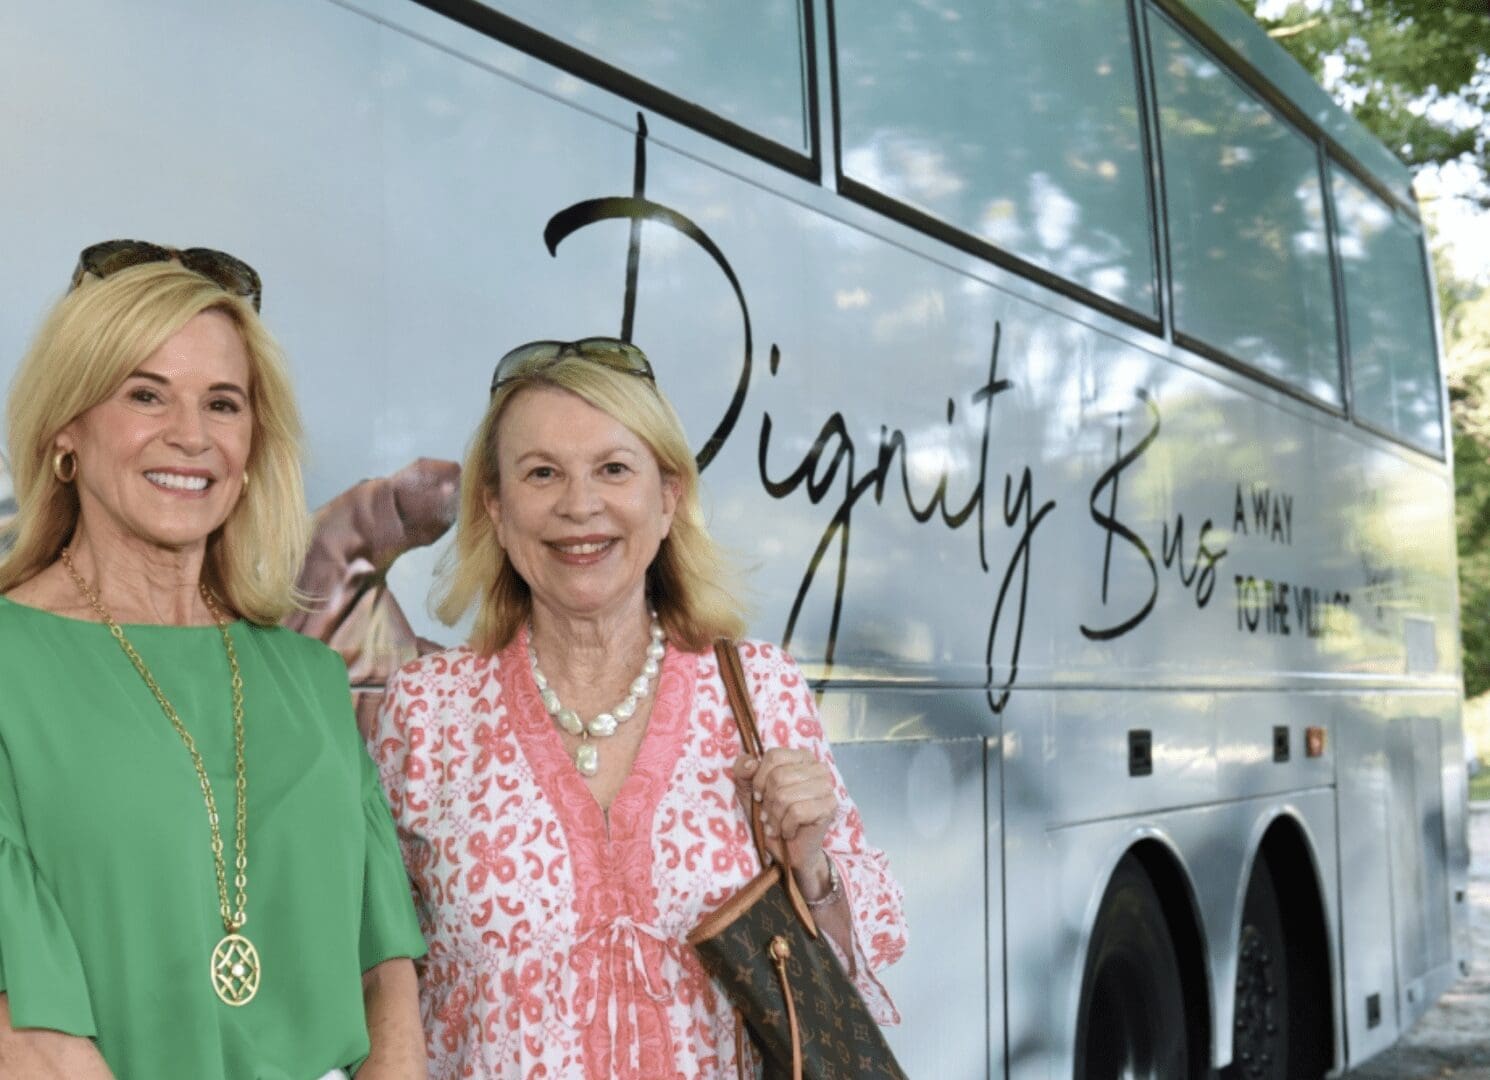 Two women standing in front of a bus.